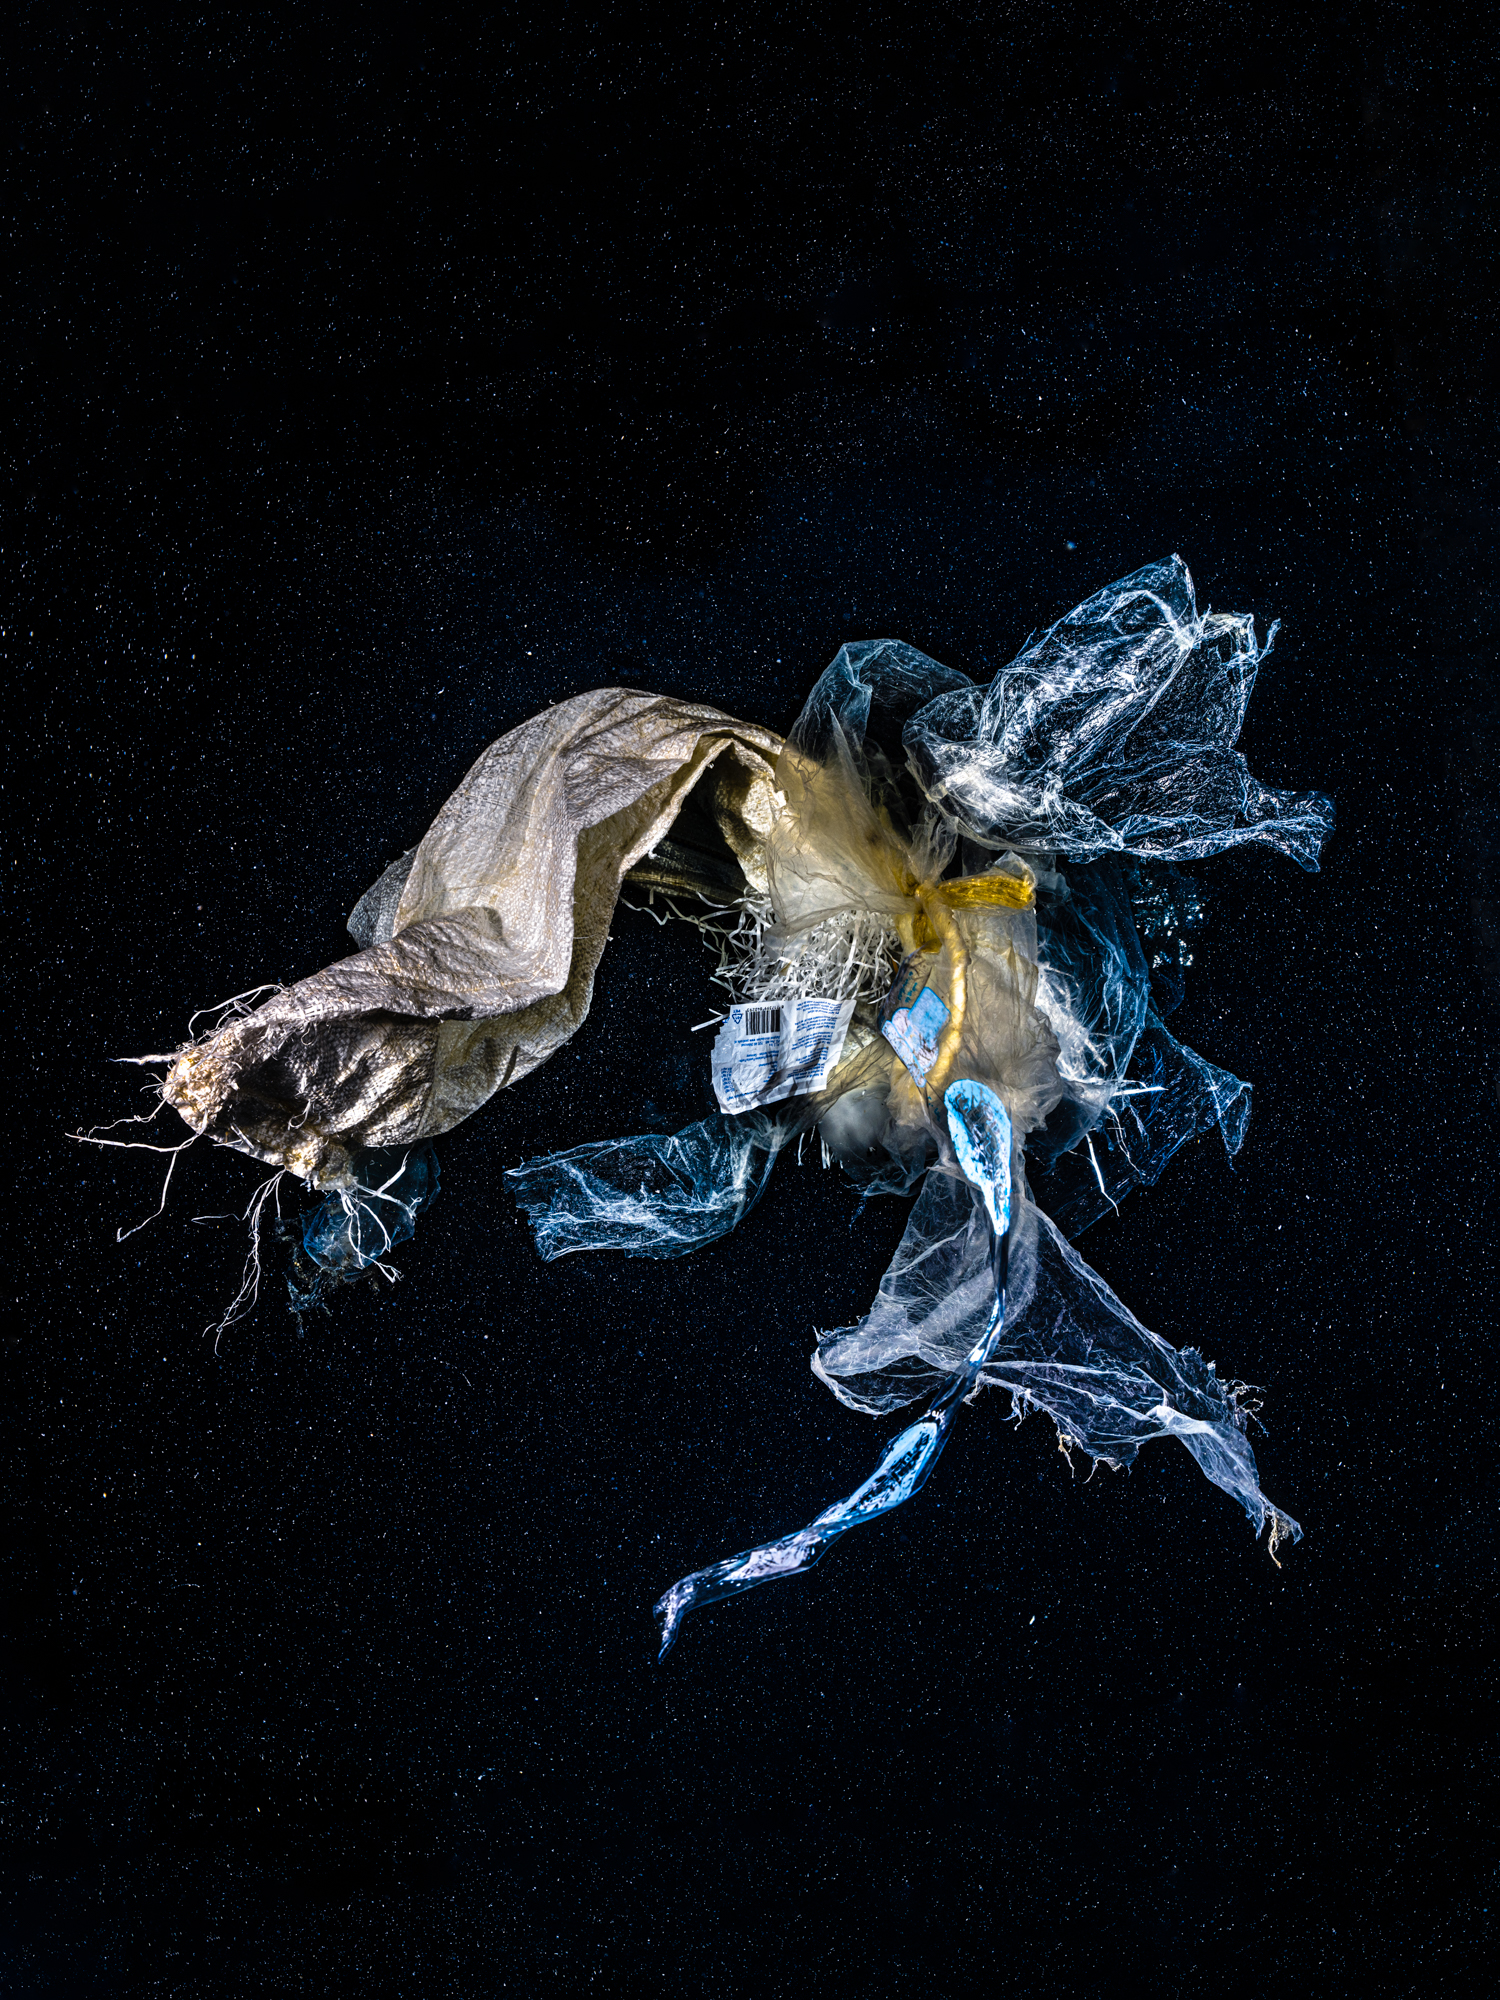 From our reckless waste, the new underwater specie emerged. Amid this aquatic cosmos, it stands as a poignant call-to-action. Its existence is a stark reveal of our footprint and a beacon of hope for redemption. Captured on a scuba dive, this ironic specie urges us to reclaim our world.